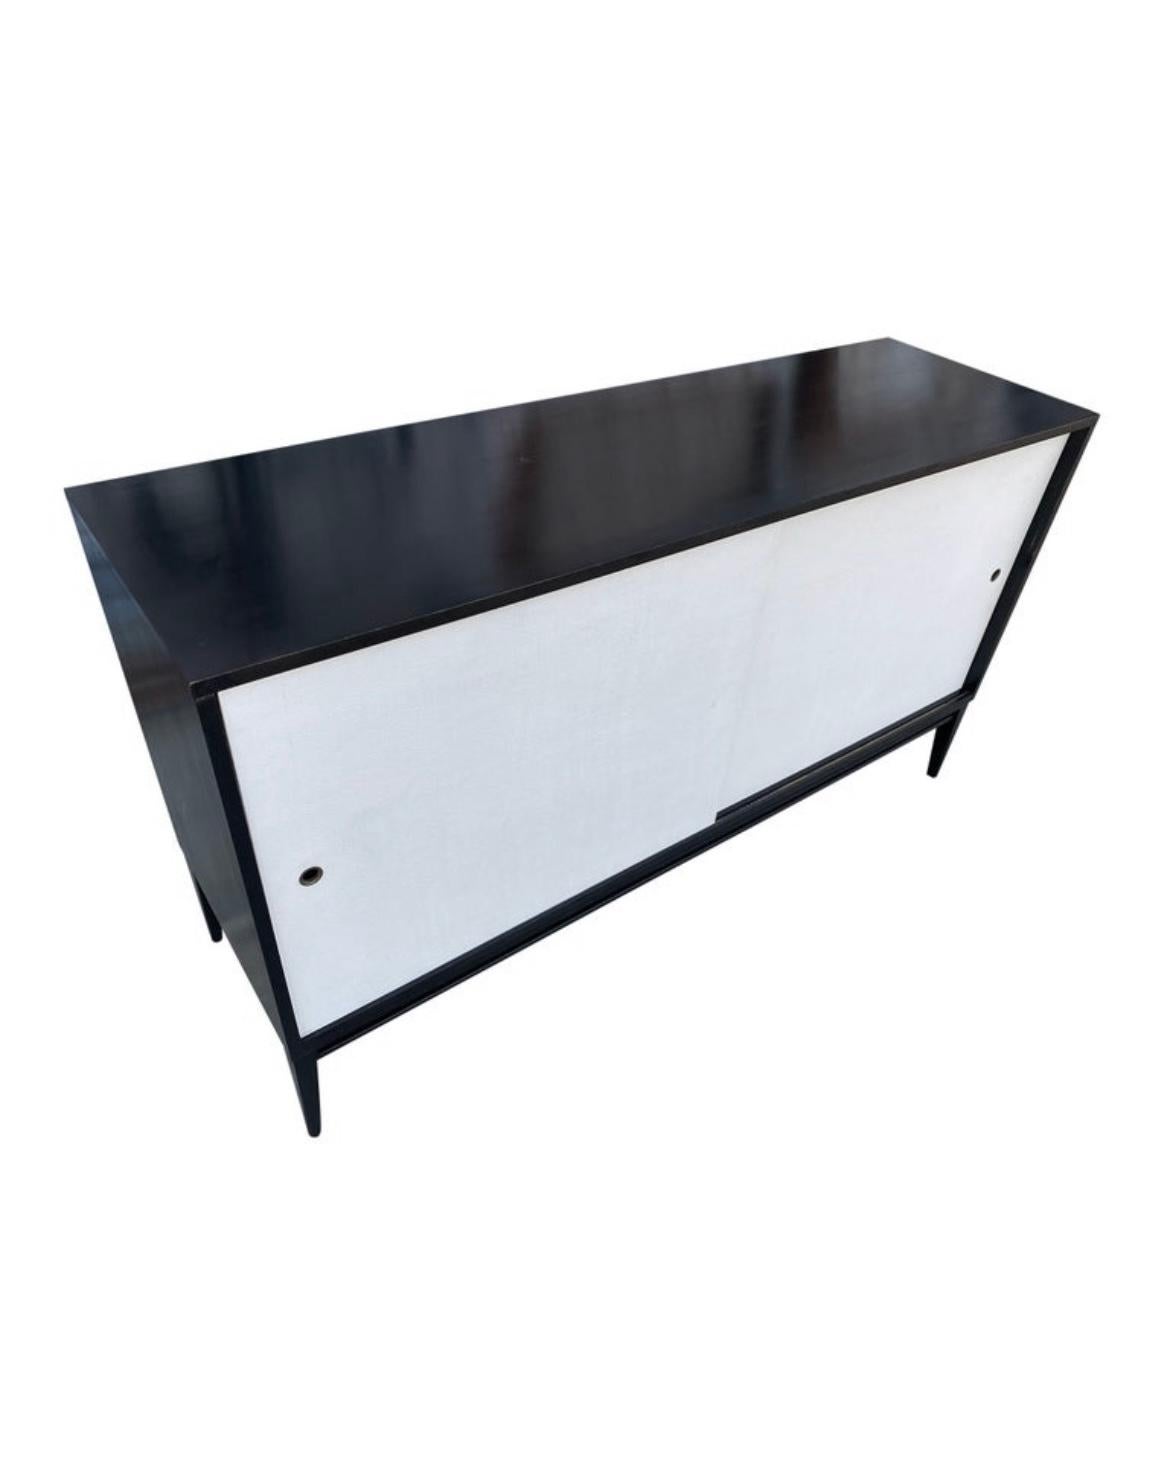 Brass Midcentury White Door Credenza Paul McCobb Planner Group #1514 Black Lacquer For Sale